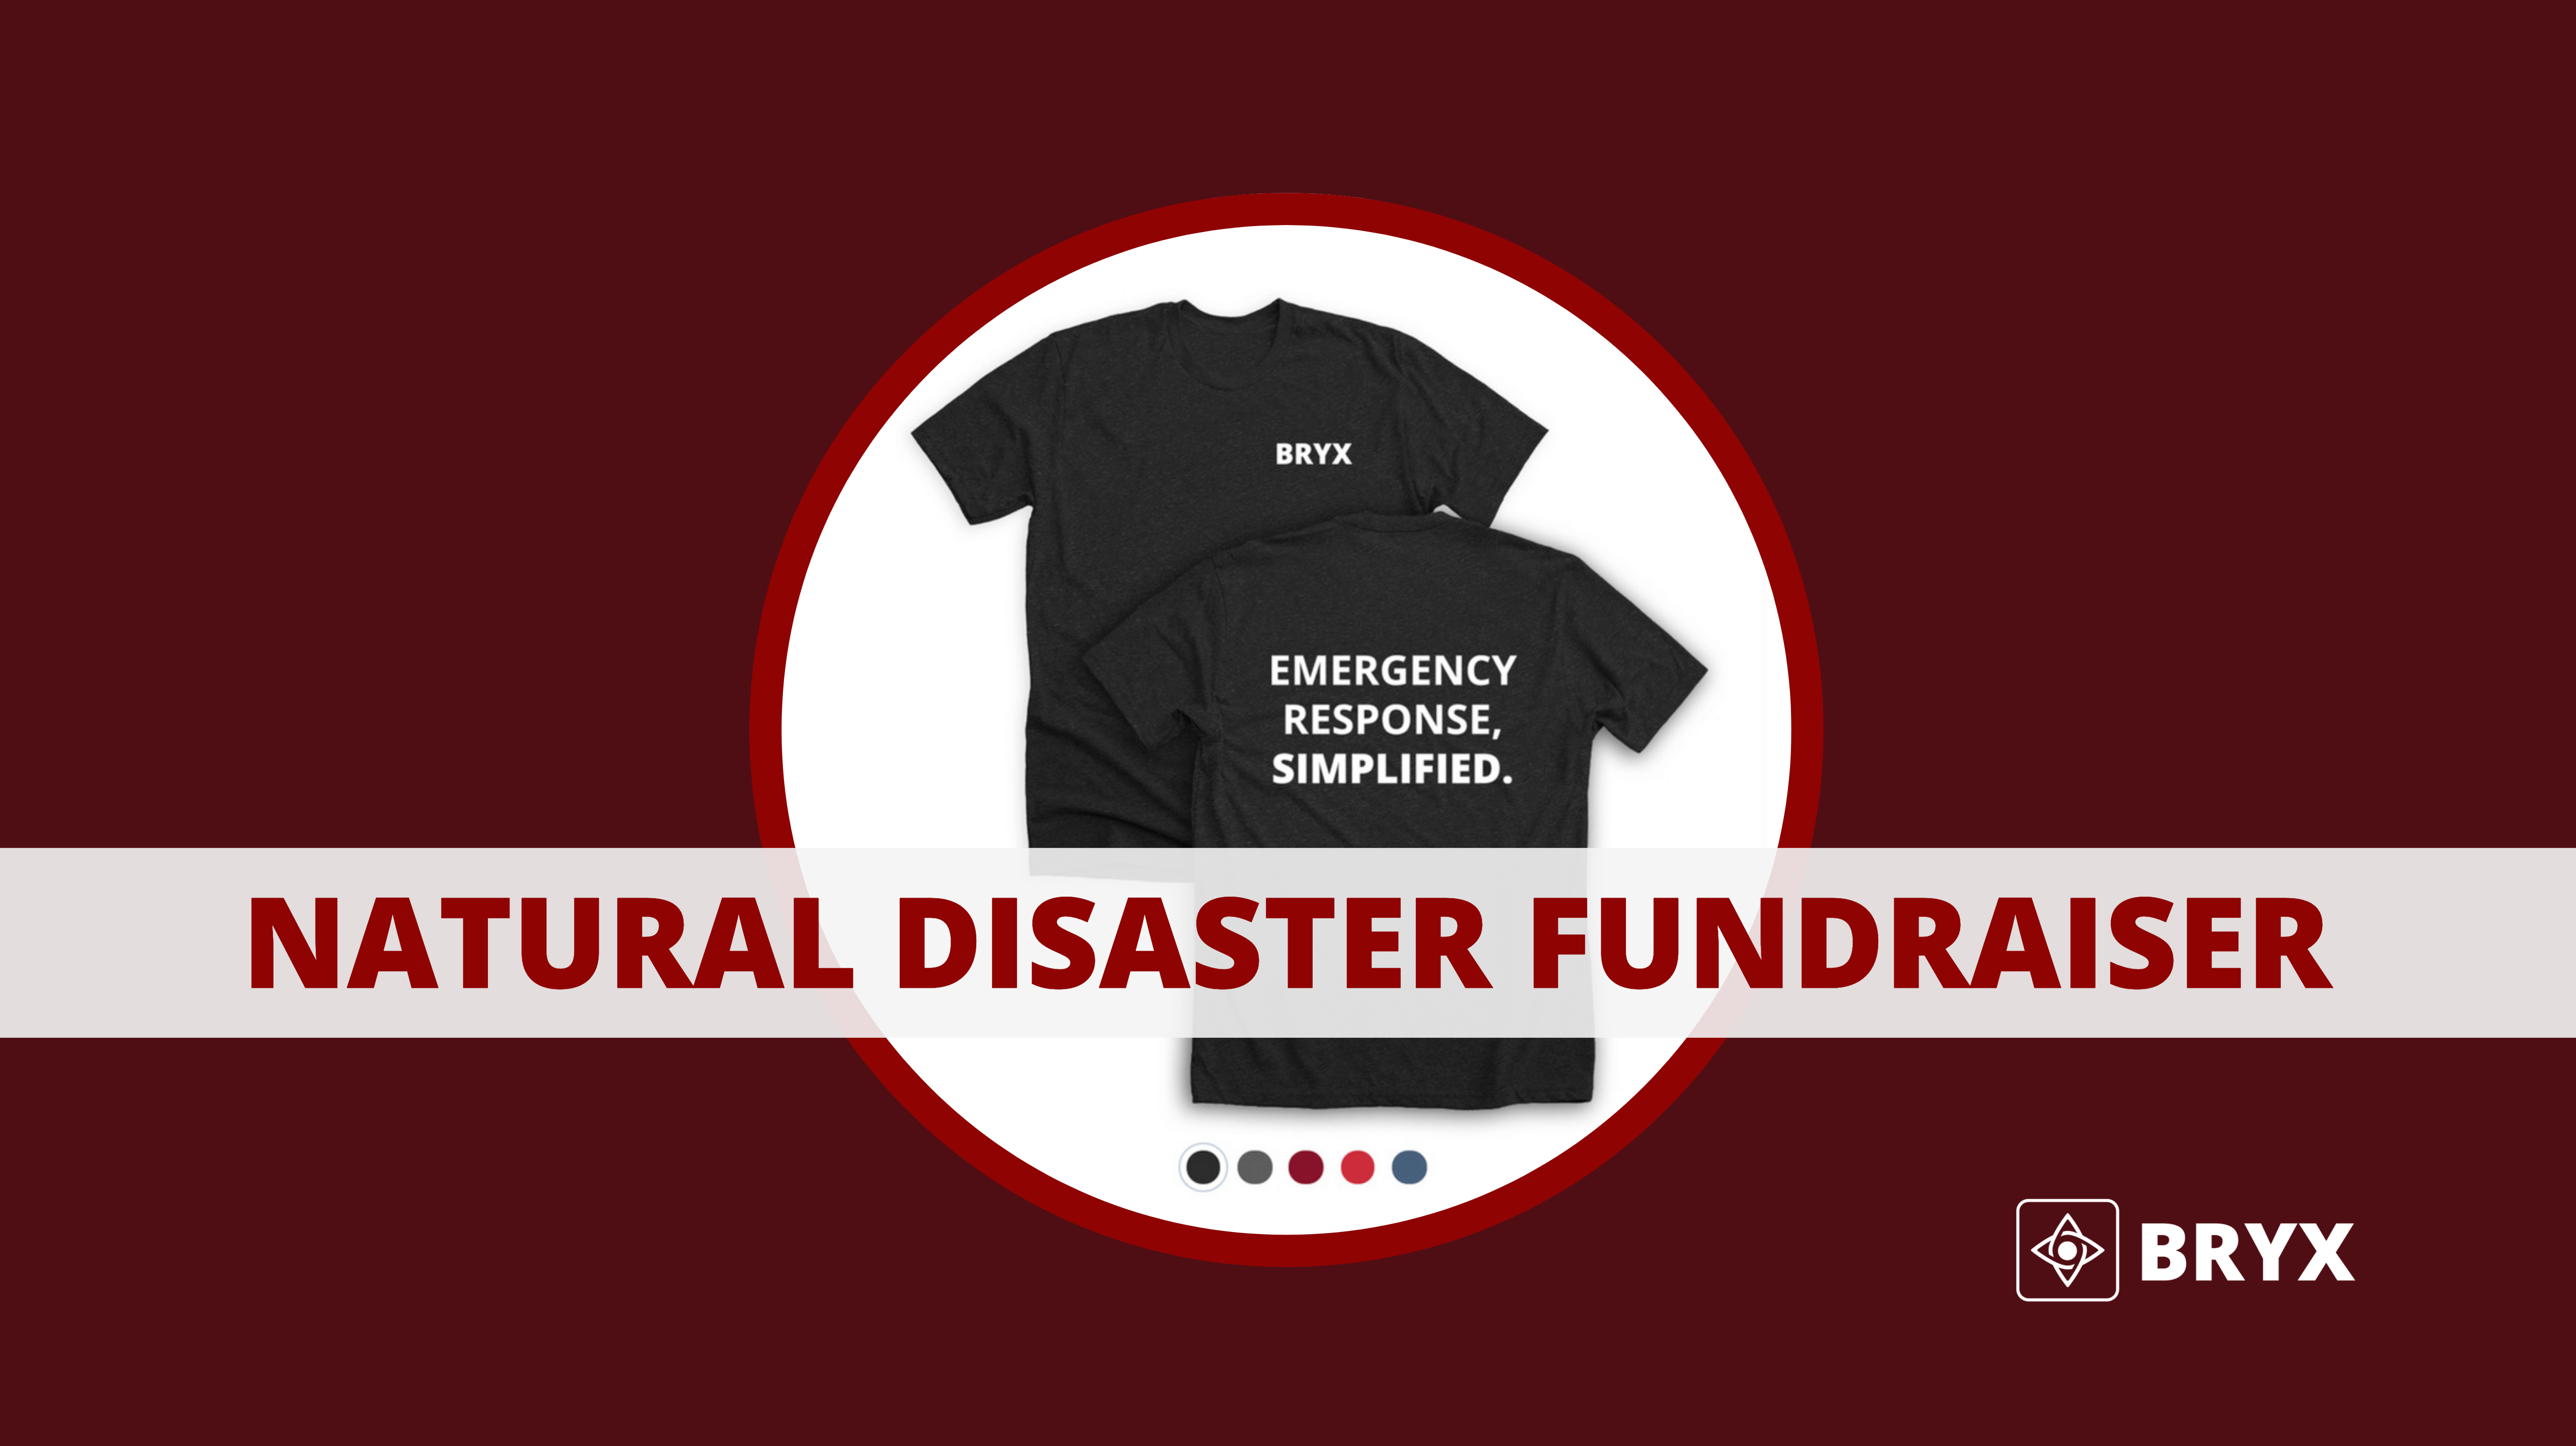 Bryx T-Shirt Fundraiser to Benefit Firefighters and Paramedics Affected By Natural Disasters